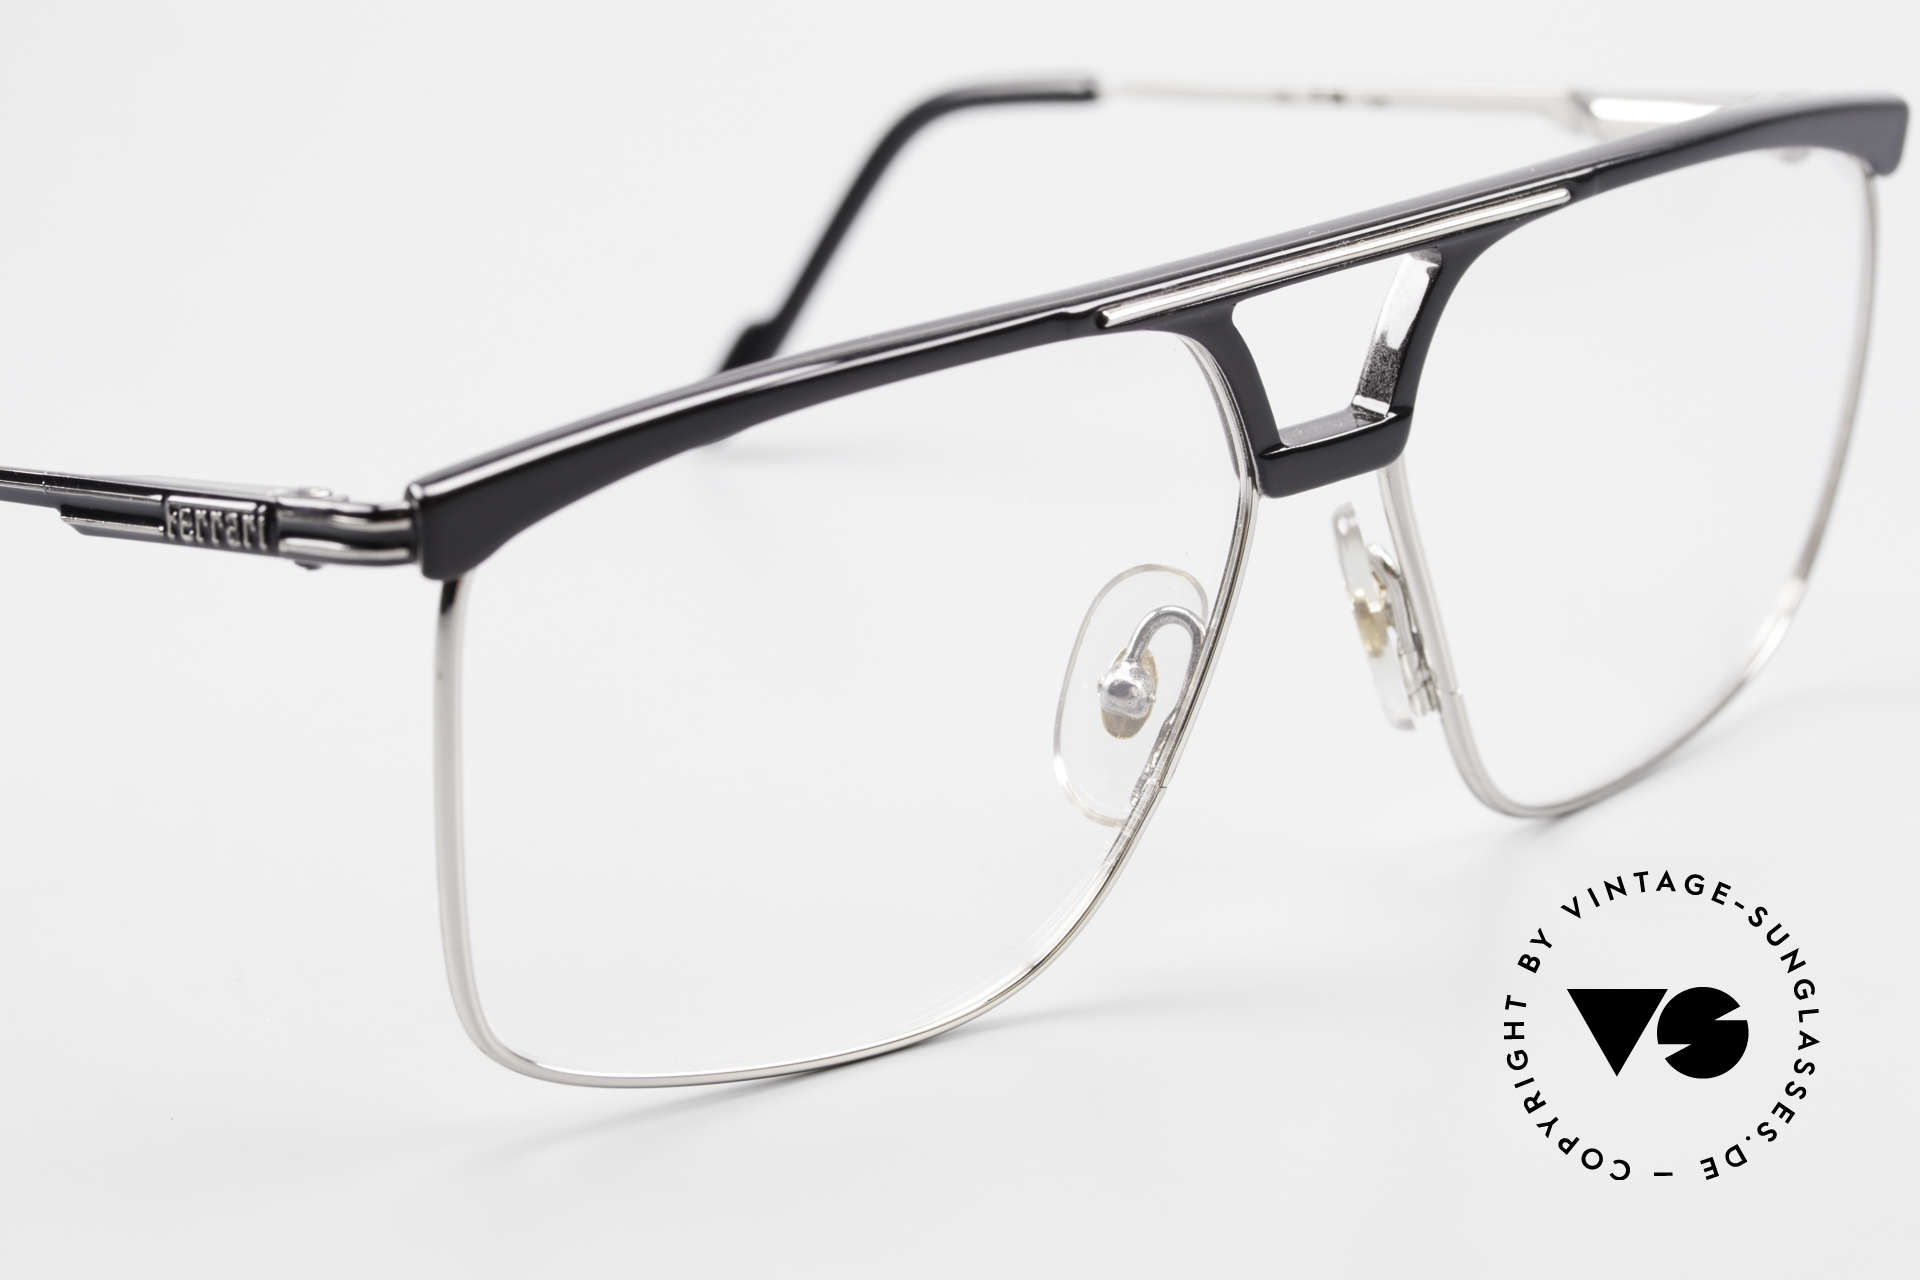 Ferrari F35 Large Vintage Men's Eyeglasses, NO RETRO fashion; a unique classic of the early 90's, Made for Men